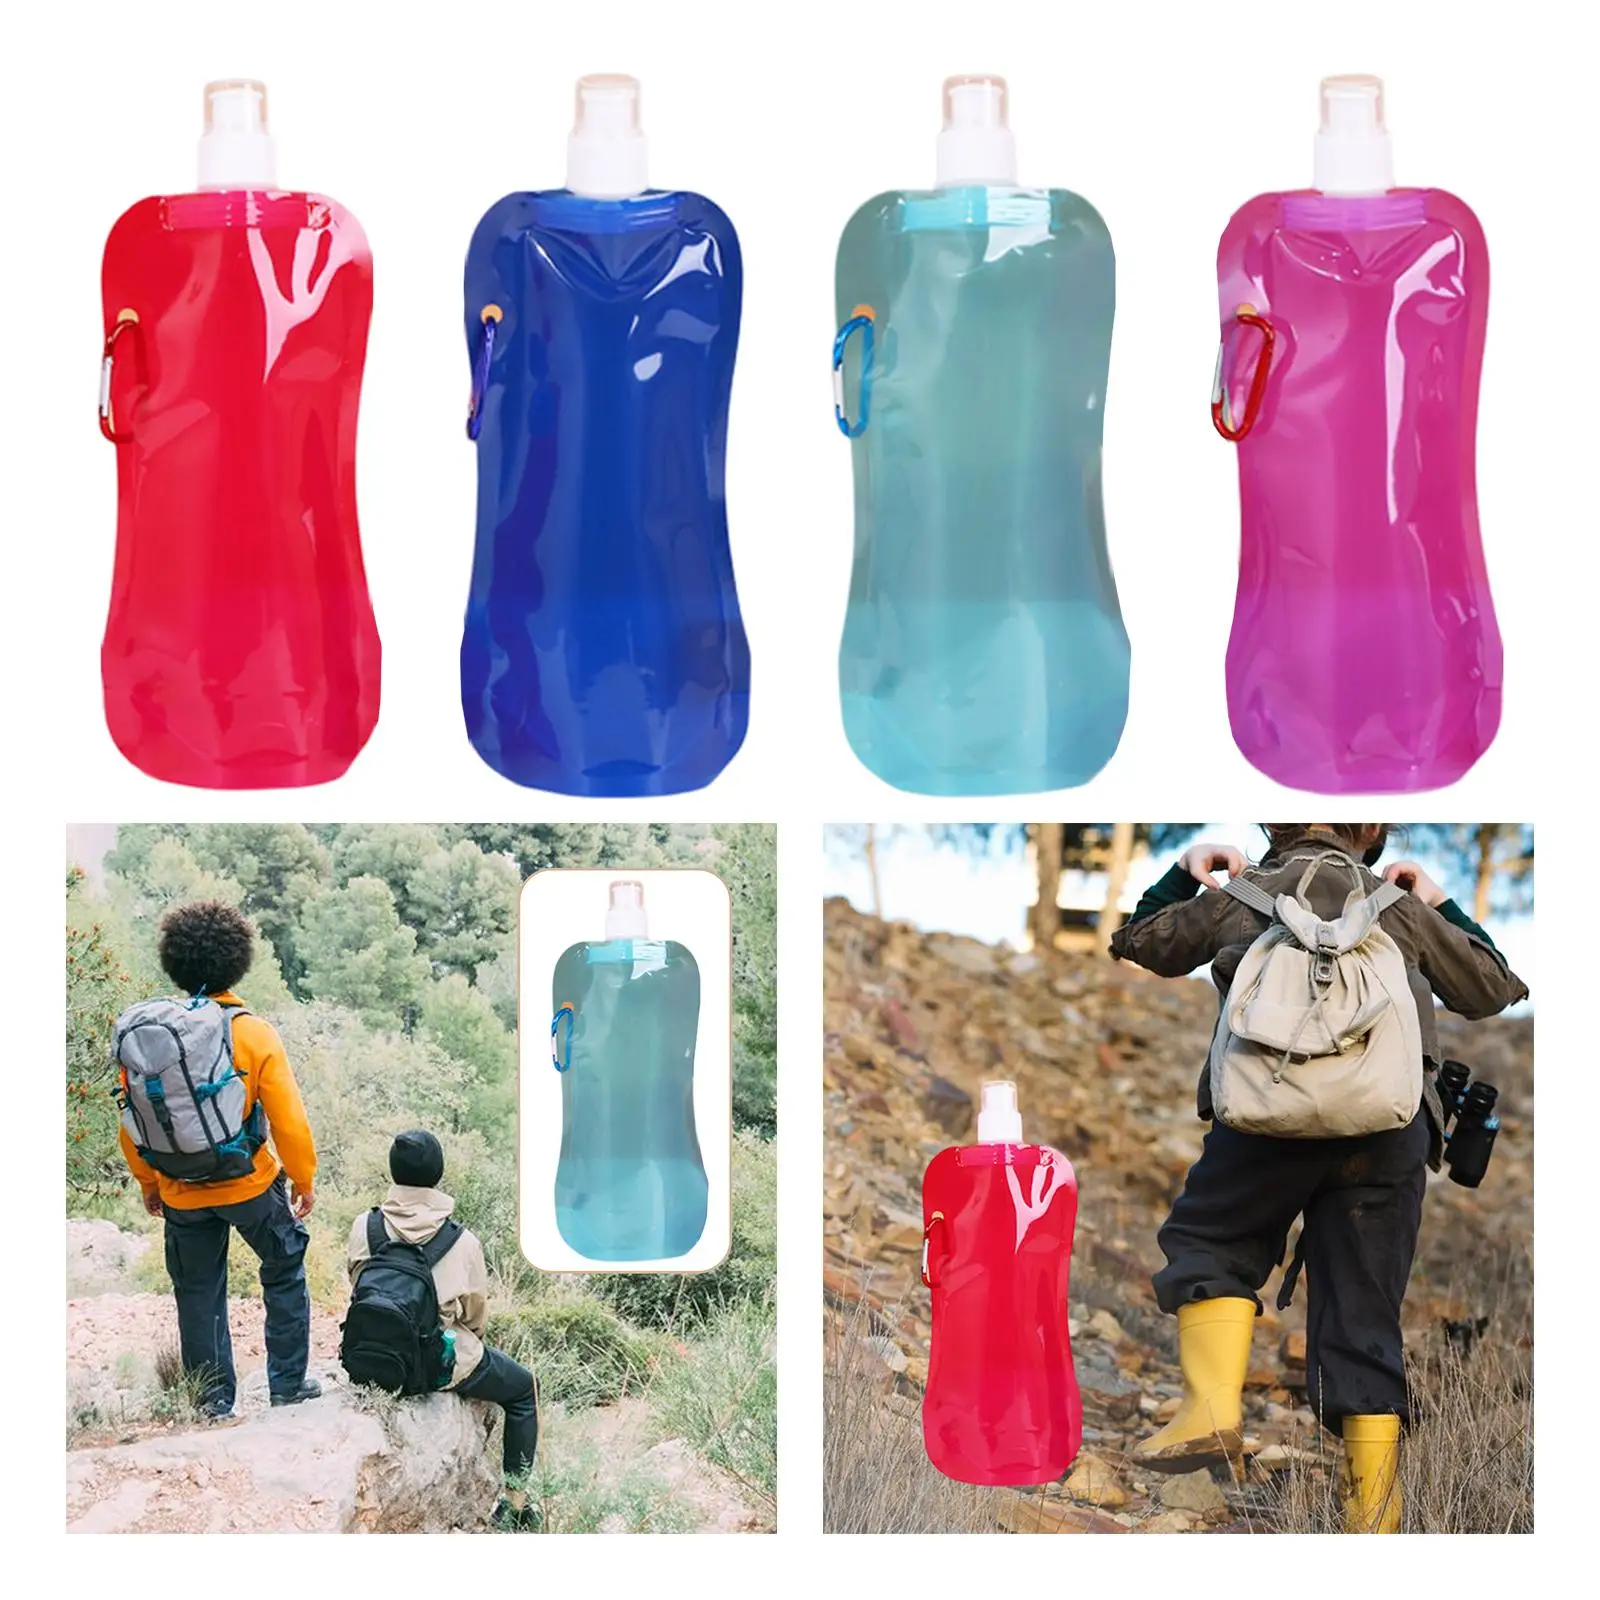 Collapsible Water Bottle for Gym, Sports, Teams, Hiking, Camping, Biking,